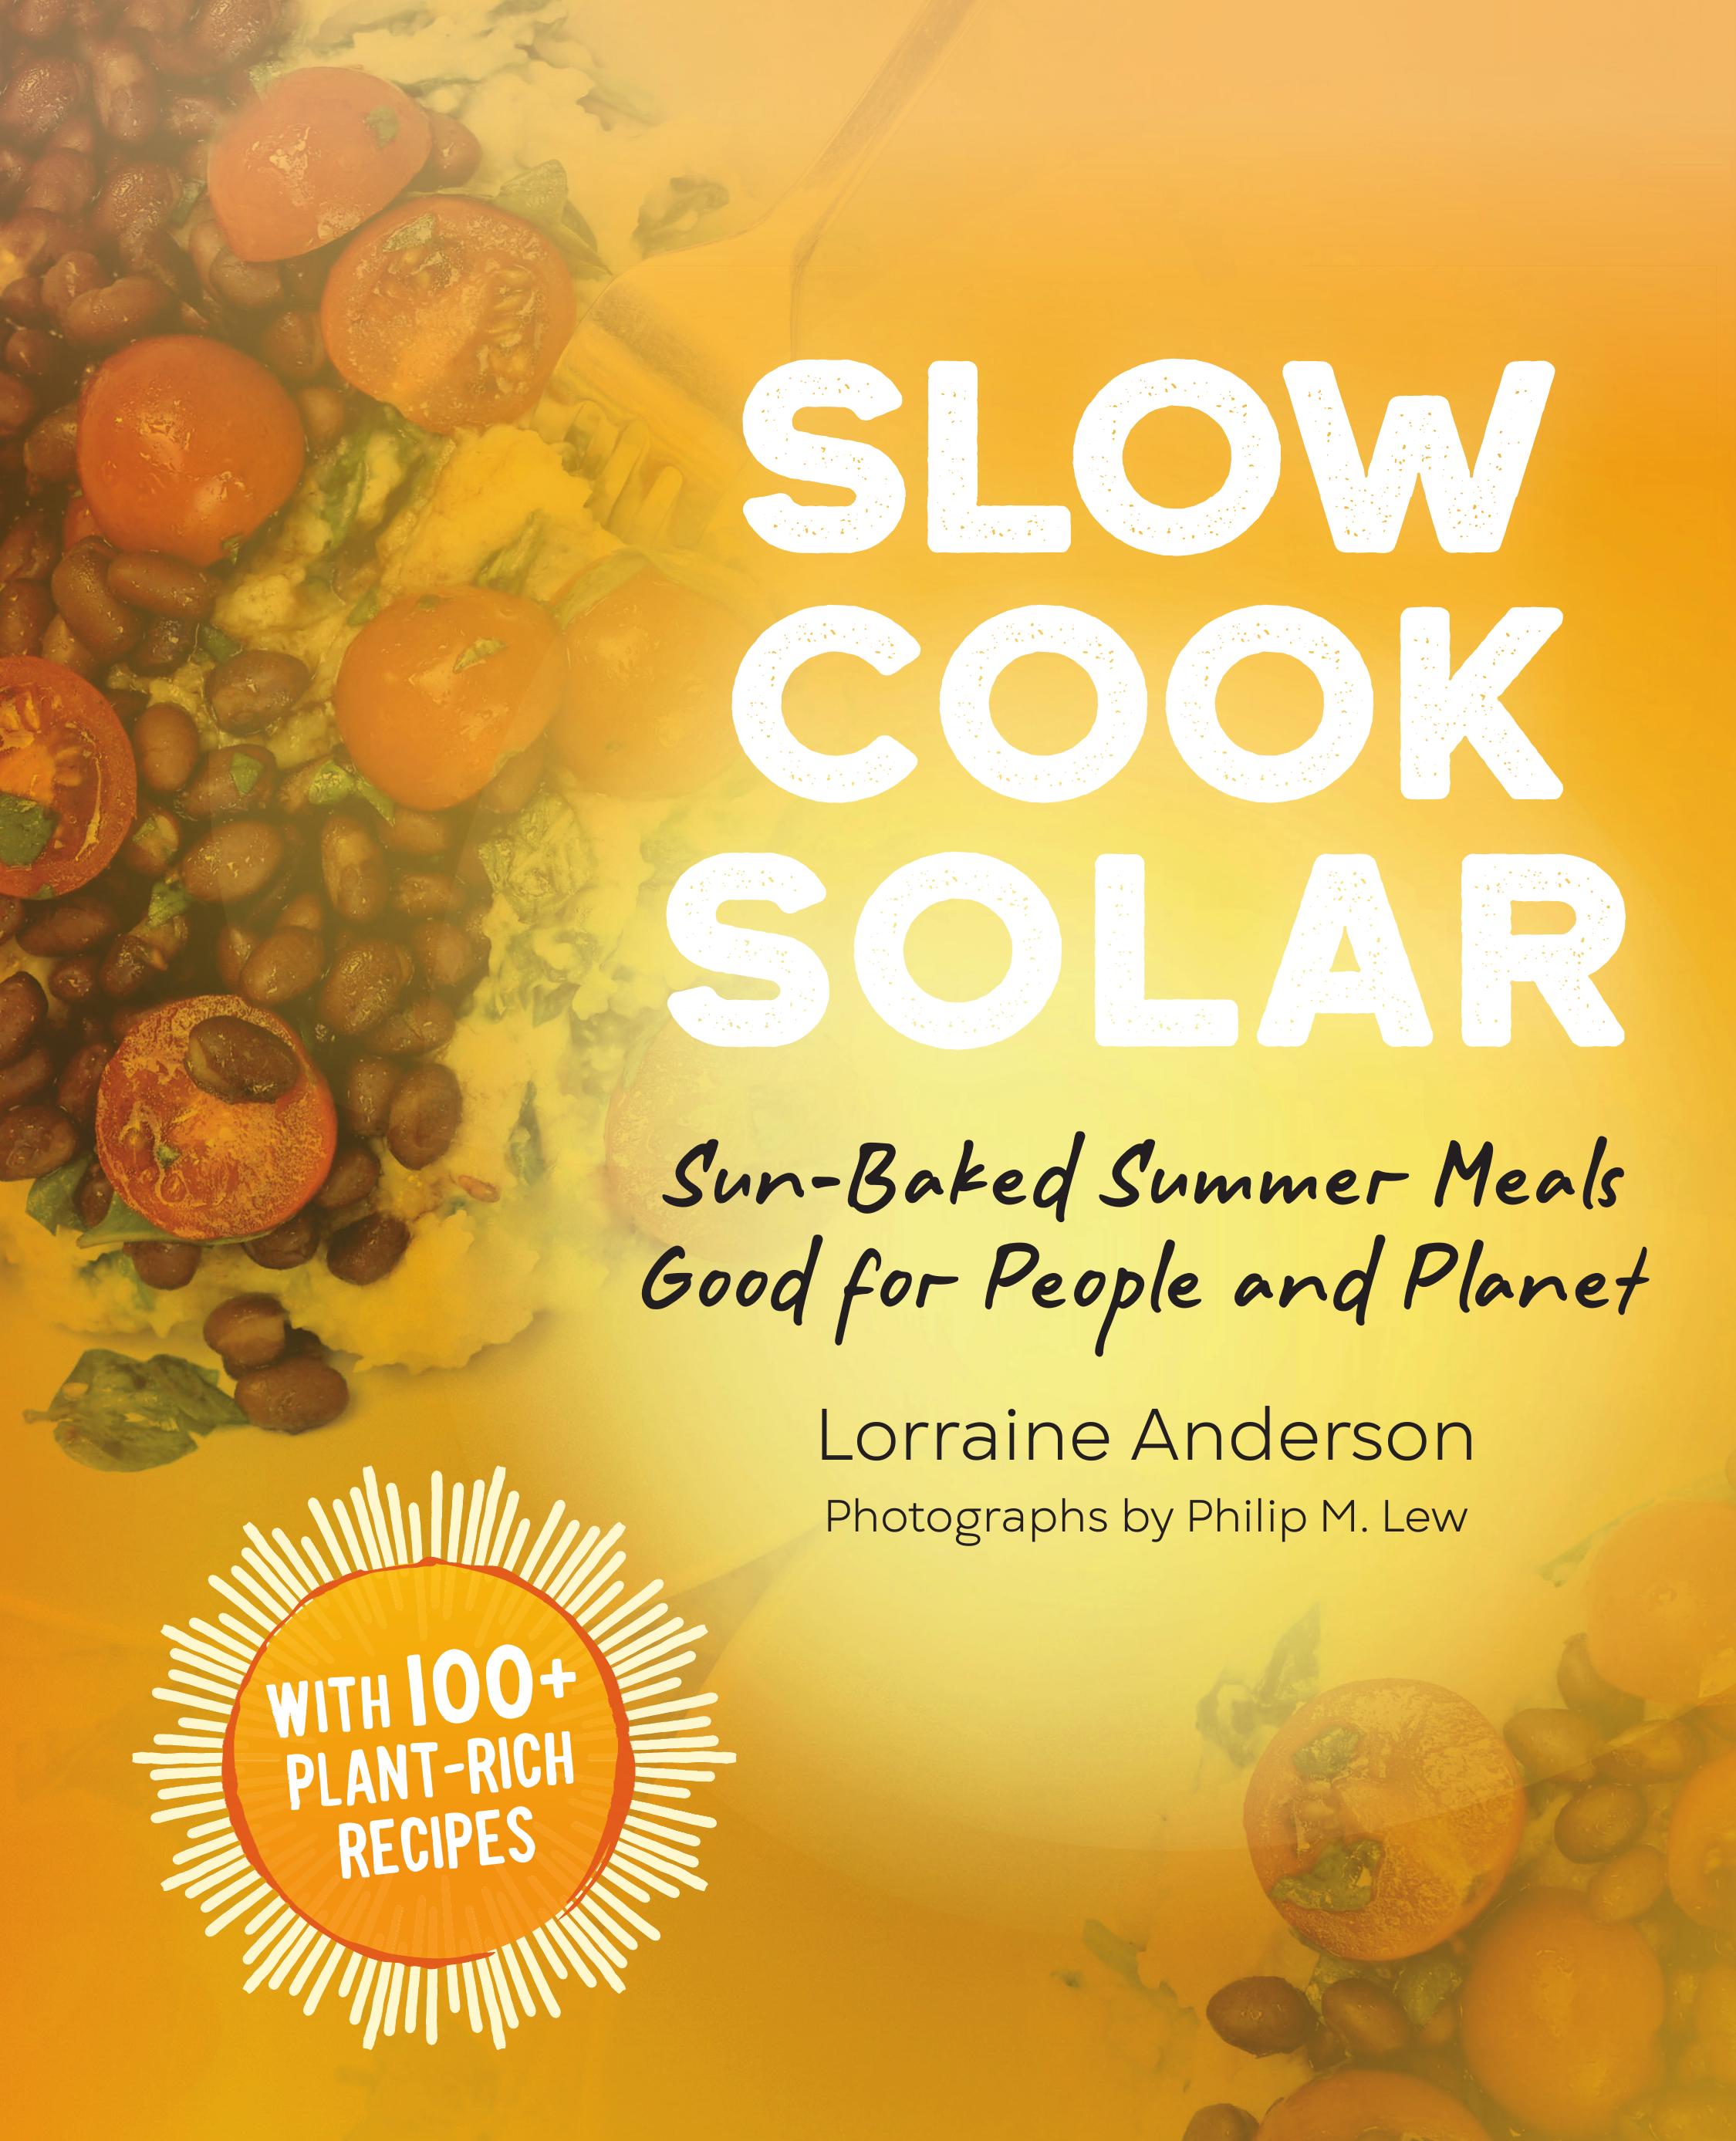 Slow Cook Solar book cover